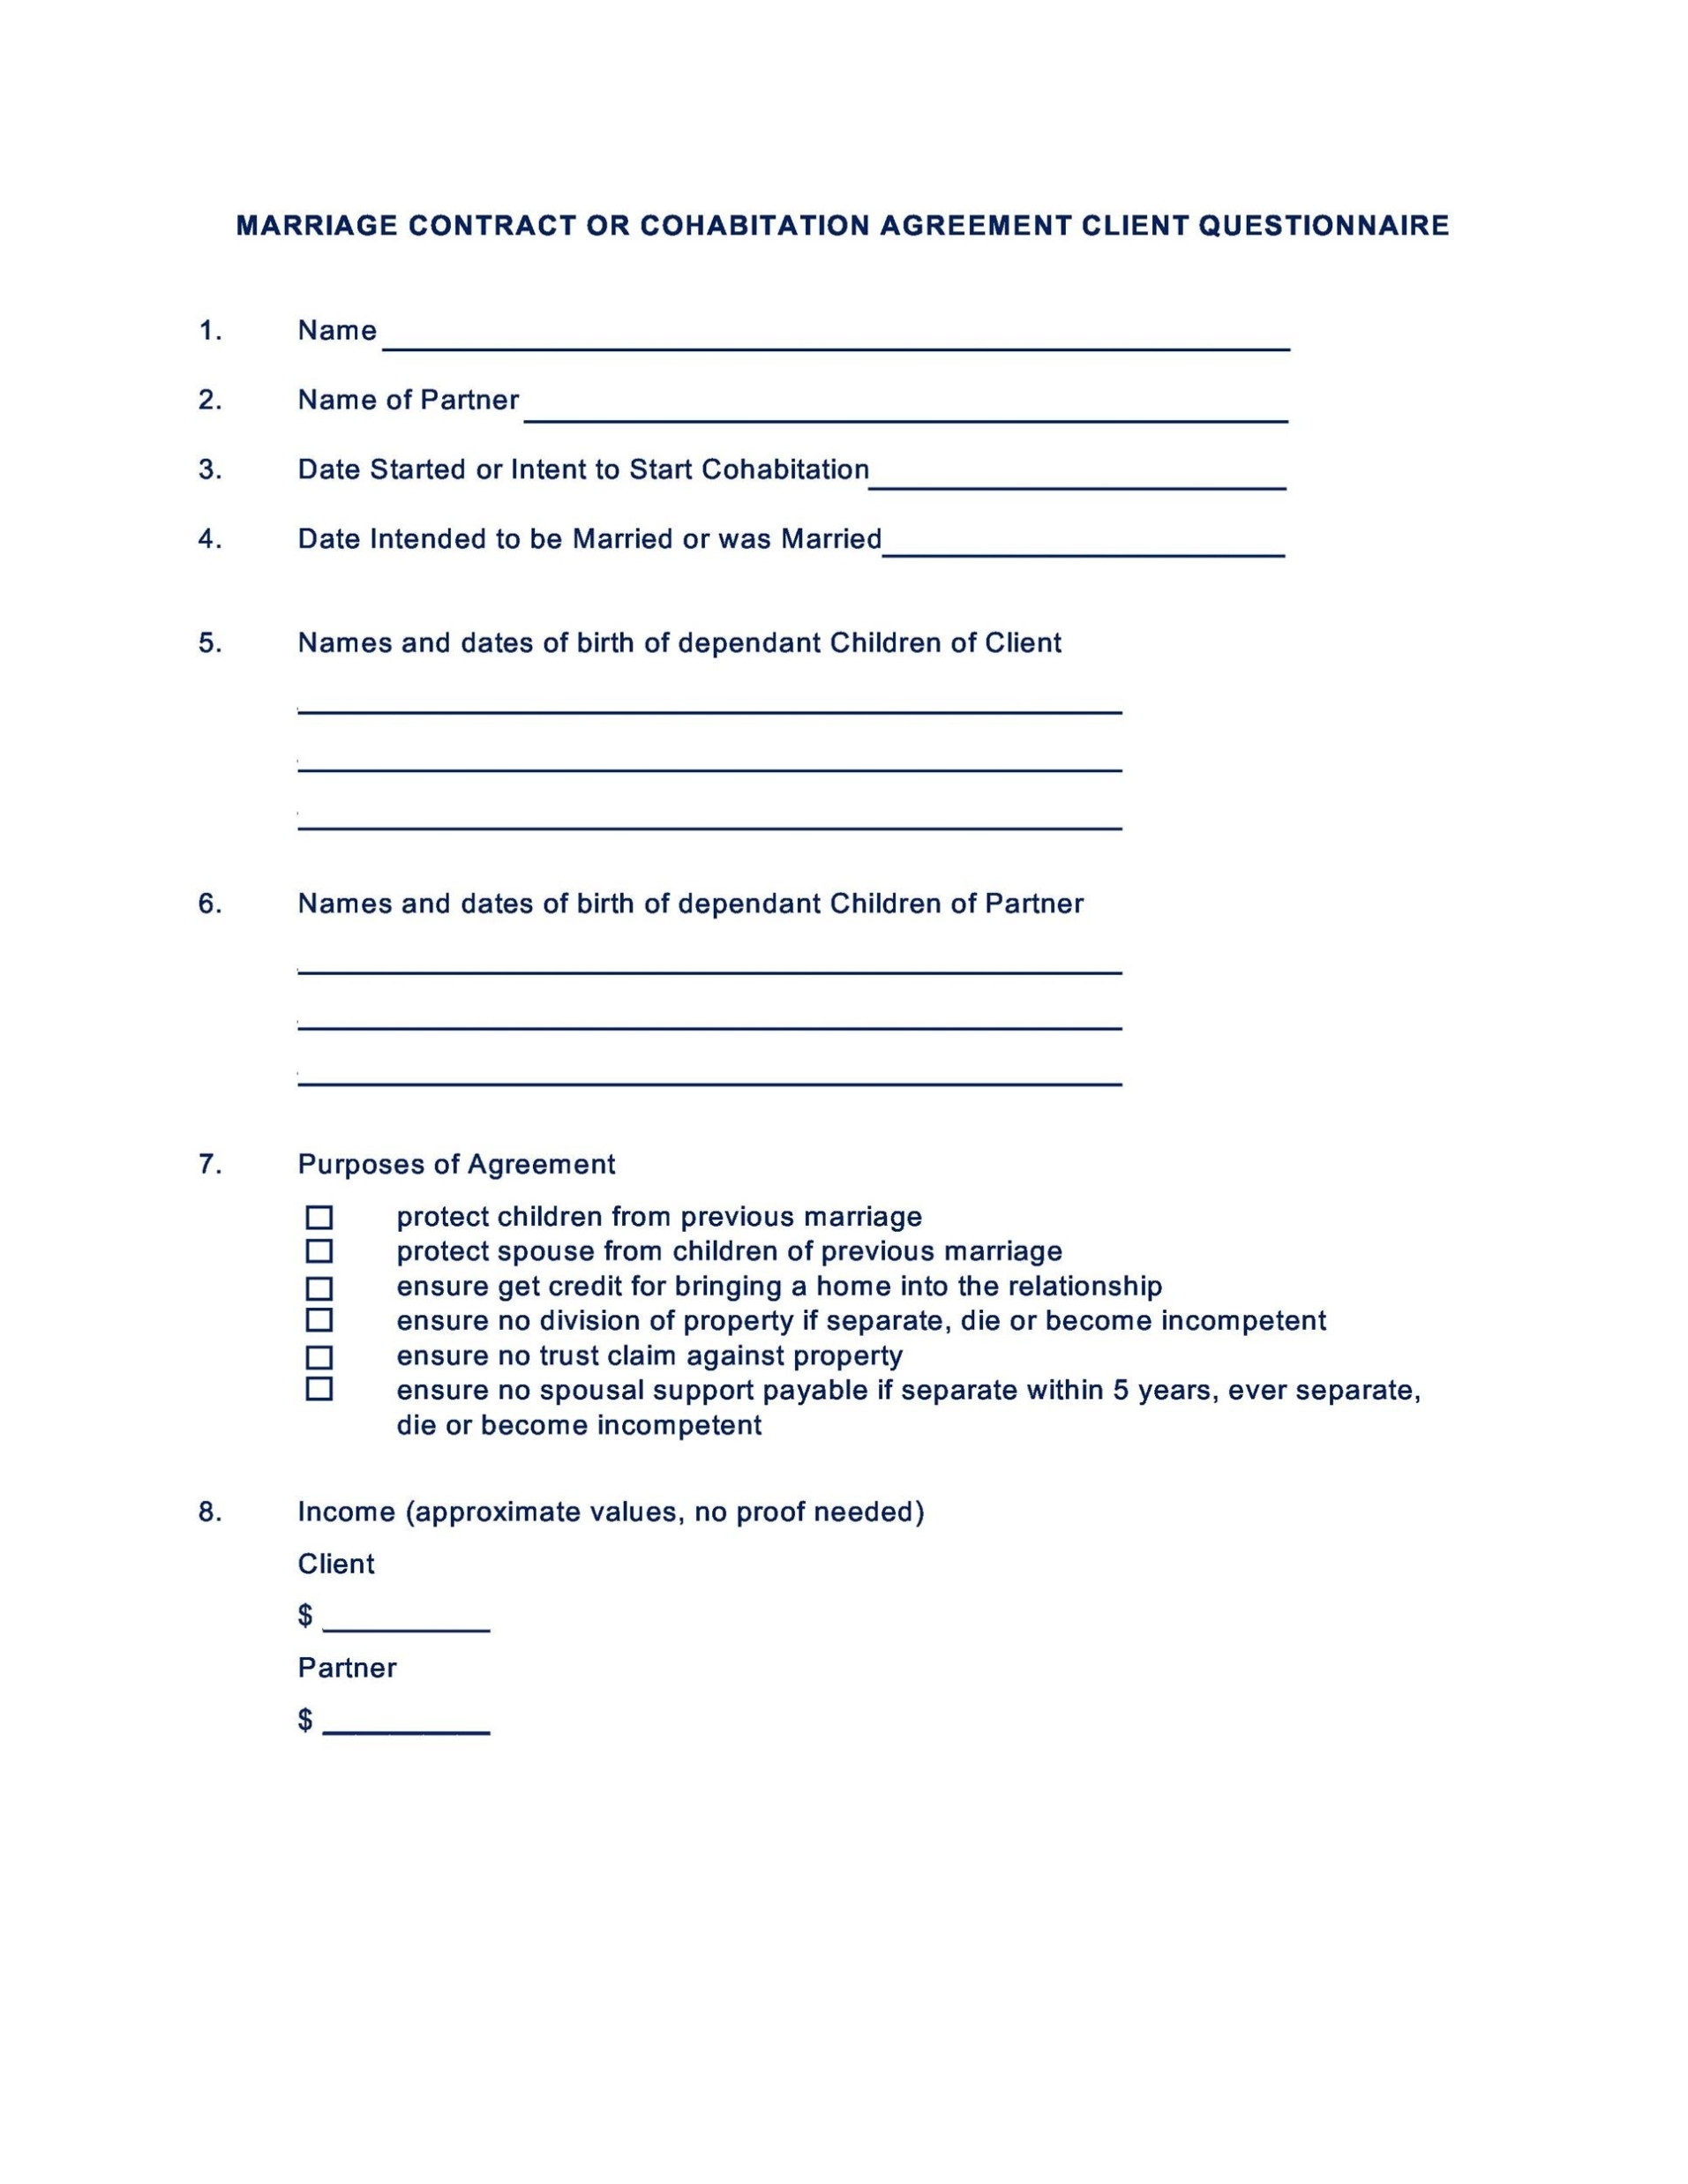 33 Marriage Contract Templates [Standart, Islamic, Jewish] ᐅ Templatelab Within Islamic Divorce Agreement Template